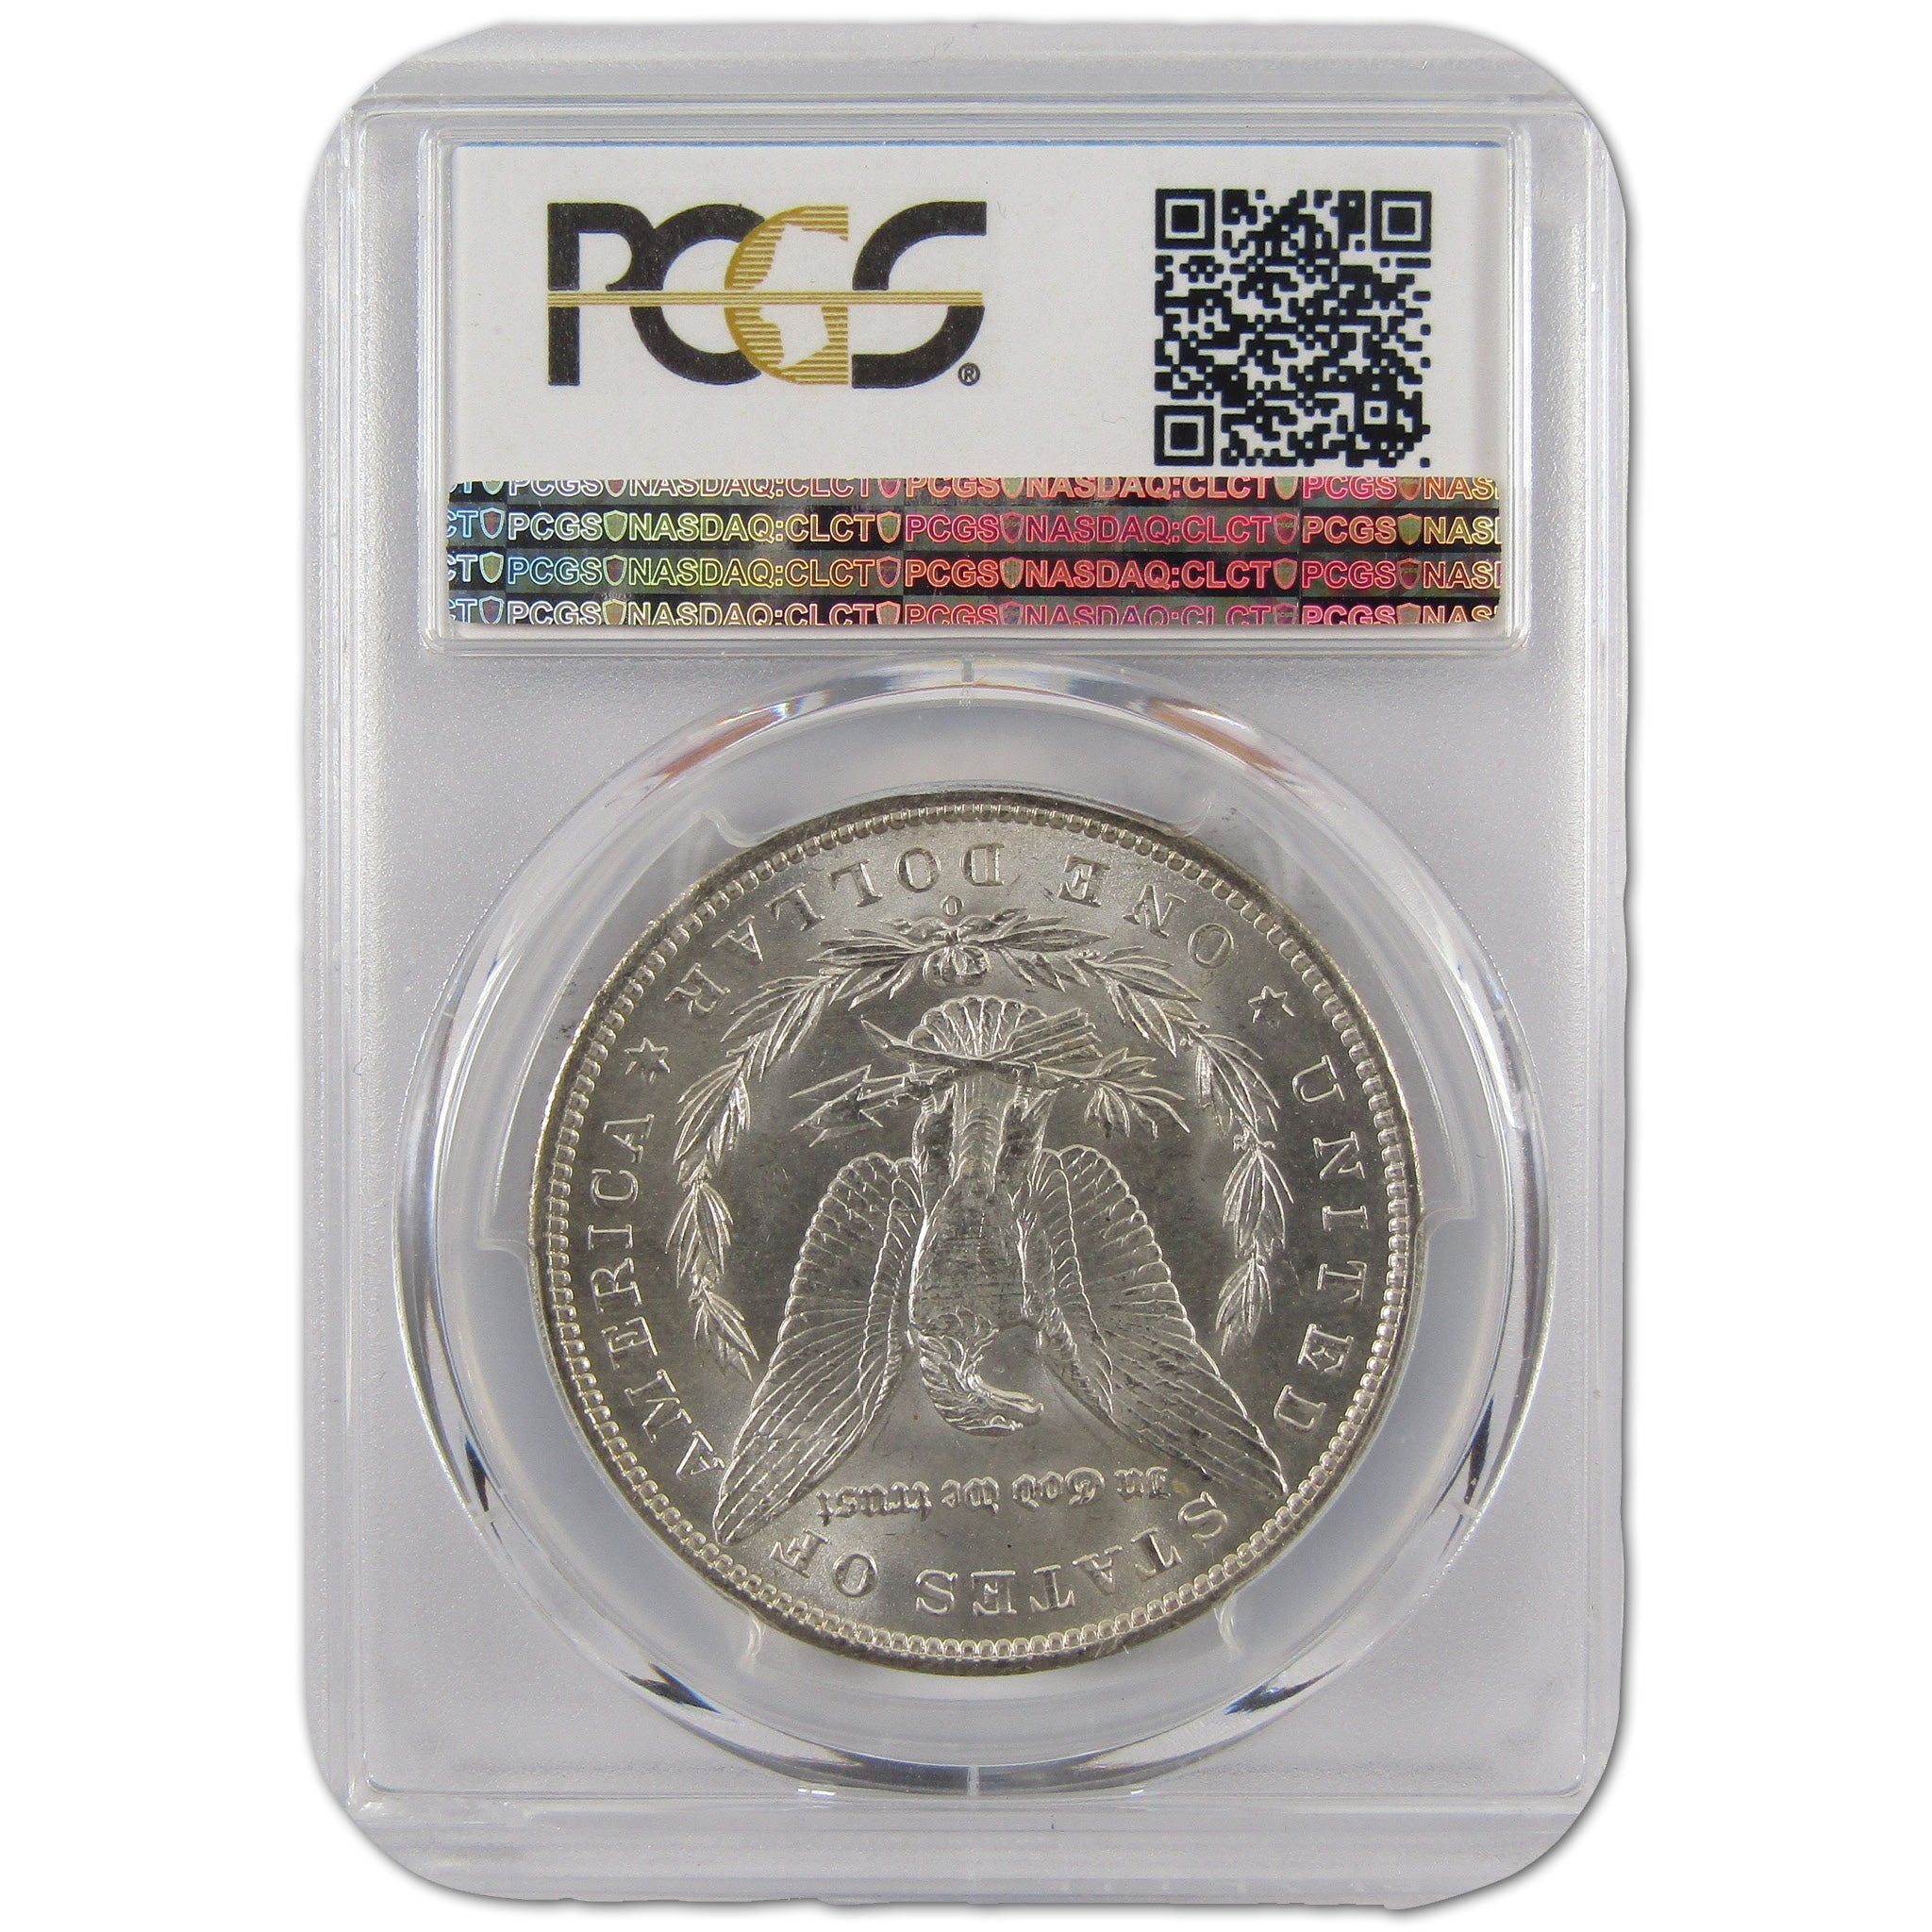 1892 O Morgan Dollar MS 63 PCGS Silver $1 Uncirculated Coin SKU:I10814 - Morgan coin - Morgan silver dollar - Morgan silver dollar for sale - Profile Coins &amp; Collectibles